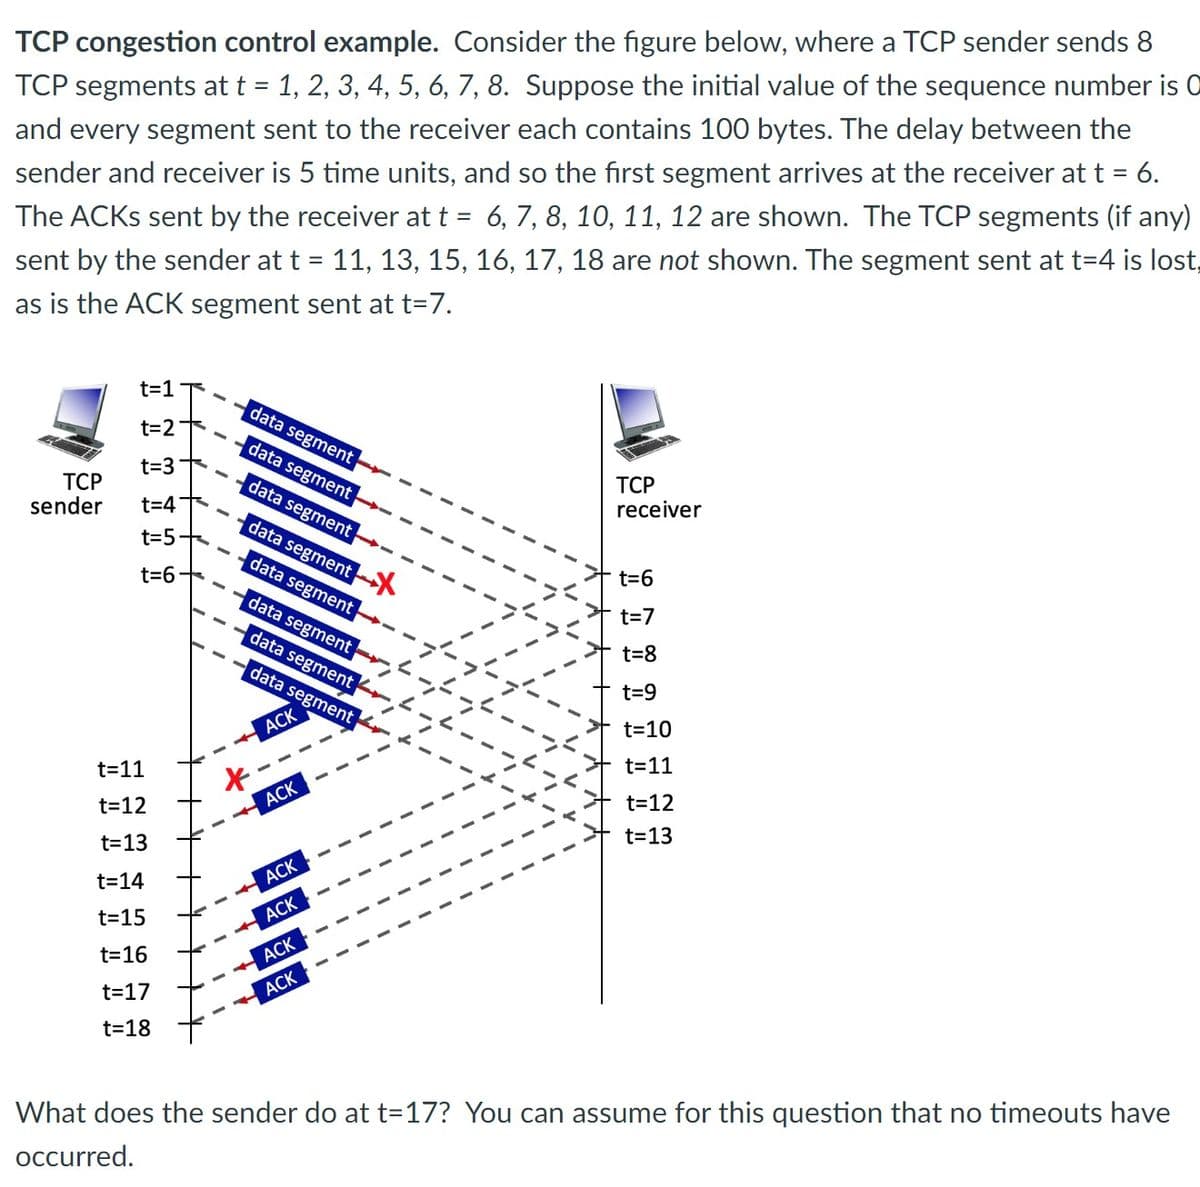 TCP congestion control example. Consider the figure below, where a TCP sender sends 8
TCP segments at t = 1, 2, 3, 4, 5, 6, 7, 8. Suppose the initial value of the sequence number is 0
and every segment sent to the receiver each contains 100 bytes. The delay between the
sender and receiver is 5 time units, and so the first segment arrives at the receiver at t = 6.
The ACKs sent by the receiver at t = 6, 7, 8, 10, 11, 12 are shown. The TCP segments (if any)
sent by the sender at t = 11, 13, 15, 16, 17, 18 are not shown. The segment sent at t=4 is lost,
as is the ACK segment sent at t=7.
TCP
sender
t=1 T
t=2
t=3
t=4+
t=5-
t=6+
t=11
t=12
t=13
t=14
t=15
t=16
t=17
t=18
I
data segment
data segment
data segment
data segment
data segment
data segment
data segment
data segment
ACK
ACK
ACK
ACK
ACK
ACK
Ty
A A
V V
htt
TCP
receiver
t=6
t=7
t=8
t=9
t=10
t=11
t=12
t=13
What does the sender do at t=17? You can assume for this question that no timeouts have
occurred.